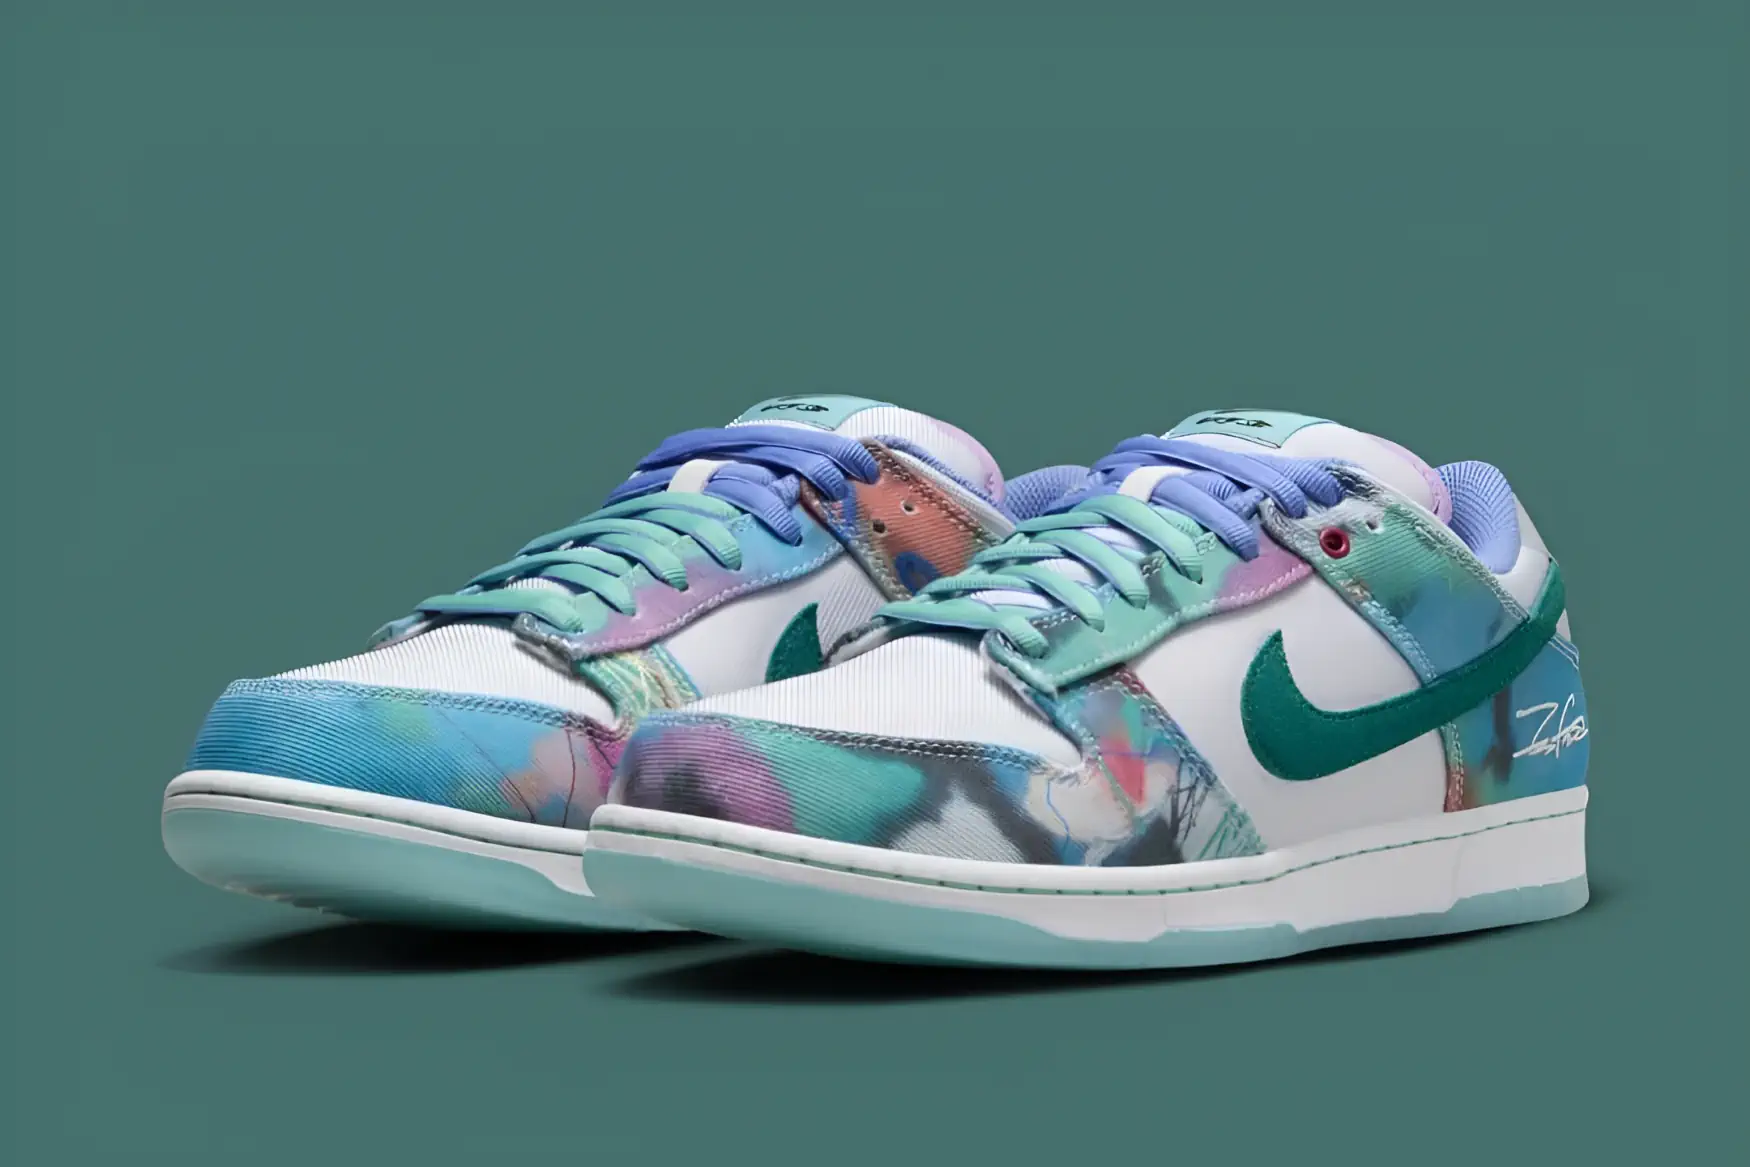 Nike SB Dunk Low Futura Unleashes Unbridled Creativity in Two Vibrant Colorways